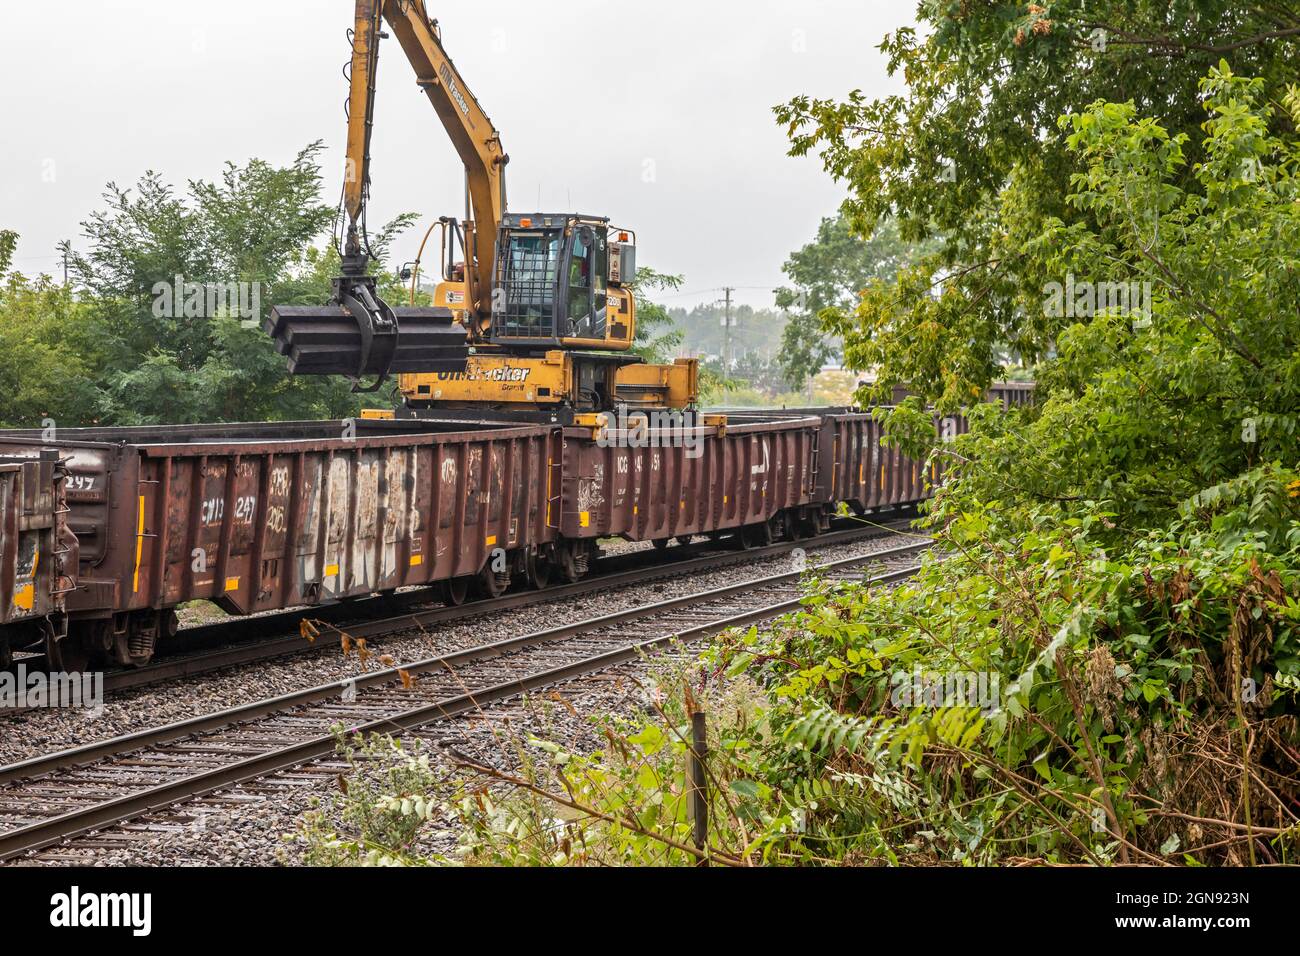 Pontiac, Michigan - A railroad maintenance crew unloads new railroad ties that will be used to replace old ties on the CN Railroad. Stock Photo